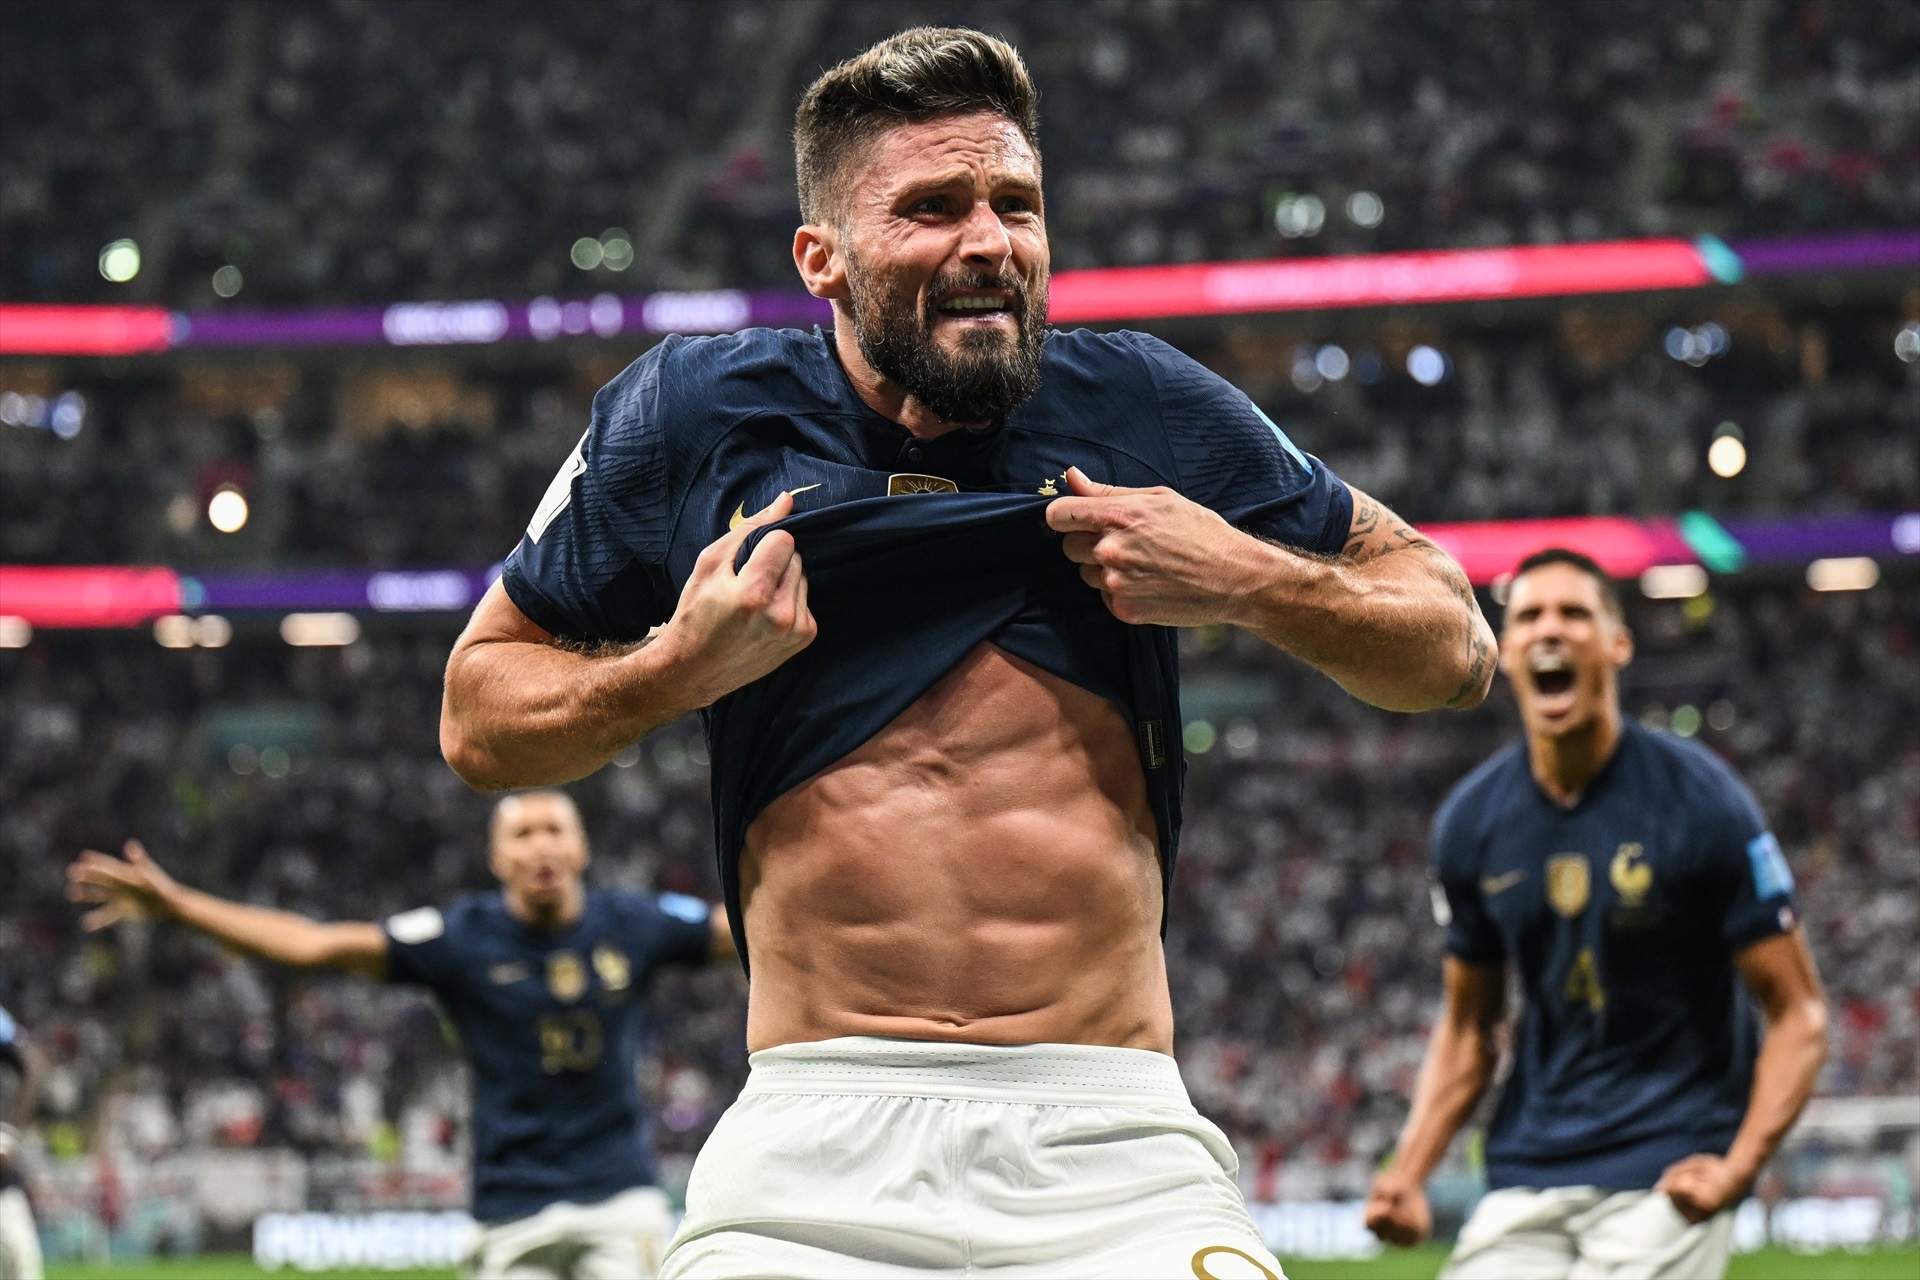 10 December 2022, Qatar, Al Khor: France's Olivier Giroud celebrates scoring his side's second goal during the FIFA World Cup Qatar 2022 Quarter-Final soccer match between England and France at the Al Bayt Stadium. Photo: Robert Michael/dpa